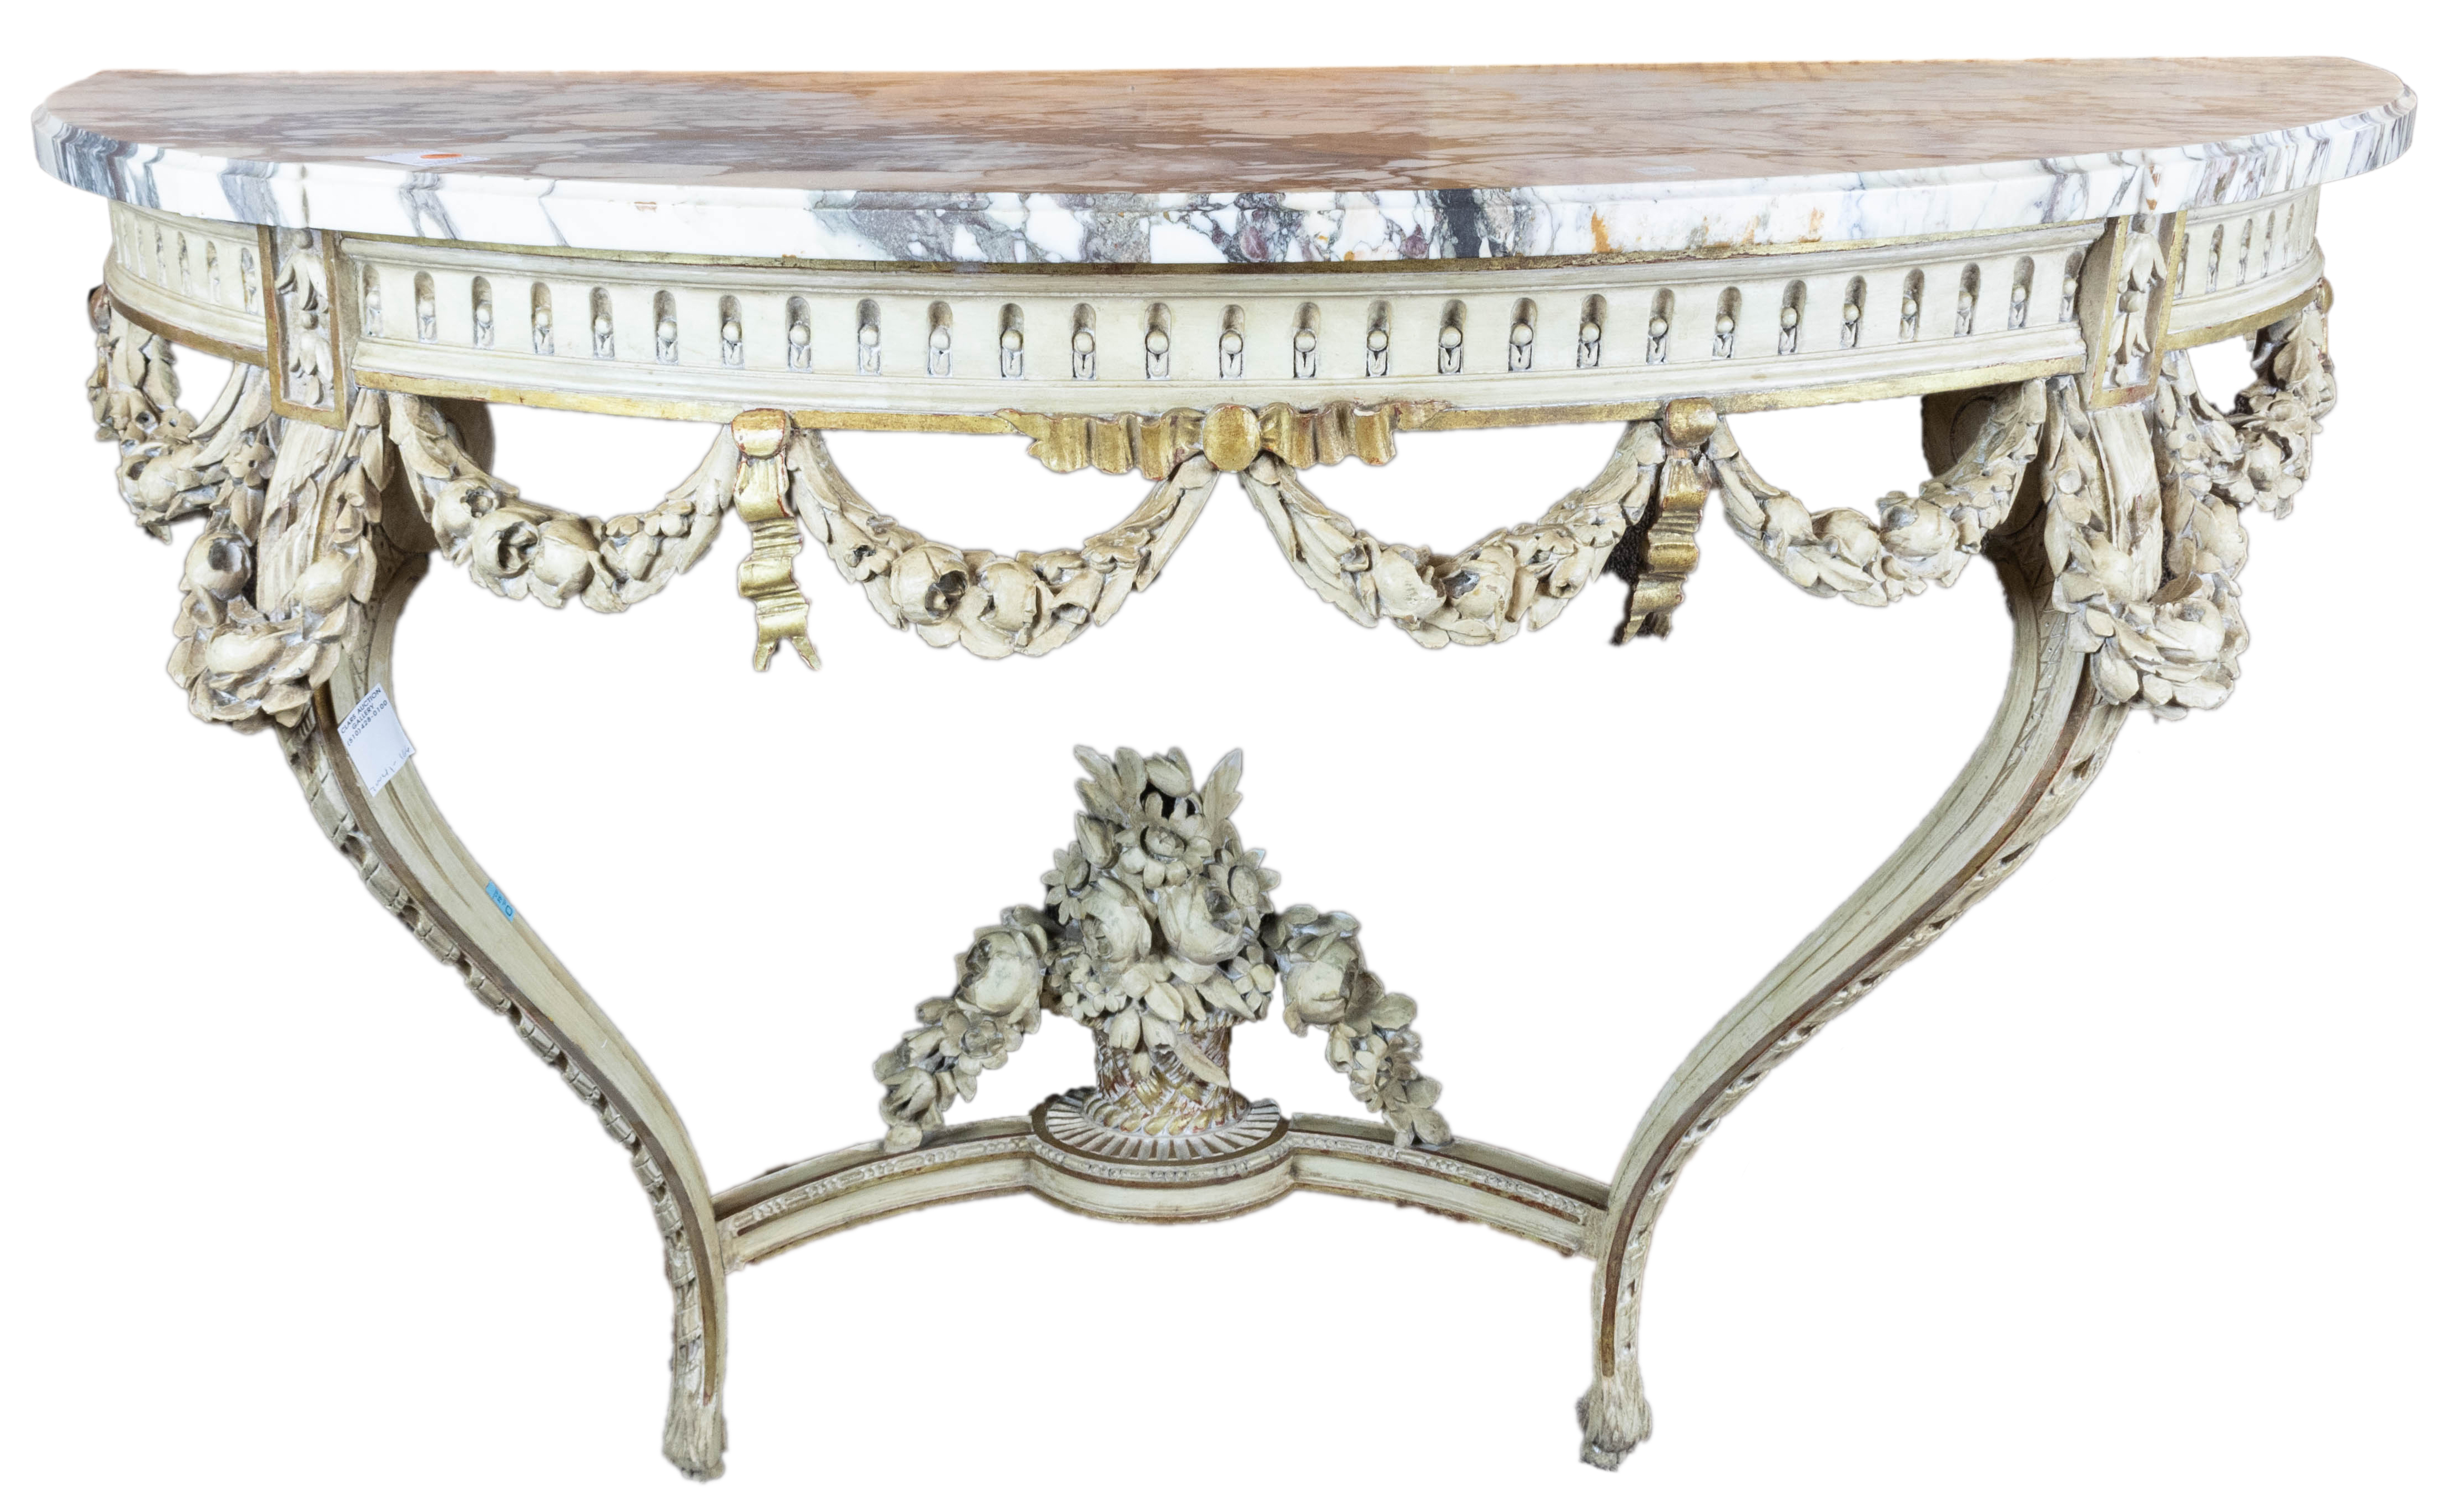 A FRENCH POLYCHROME DECORATED CONSOLE